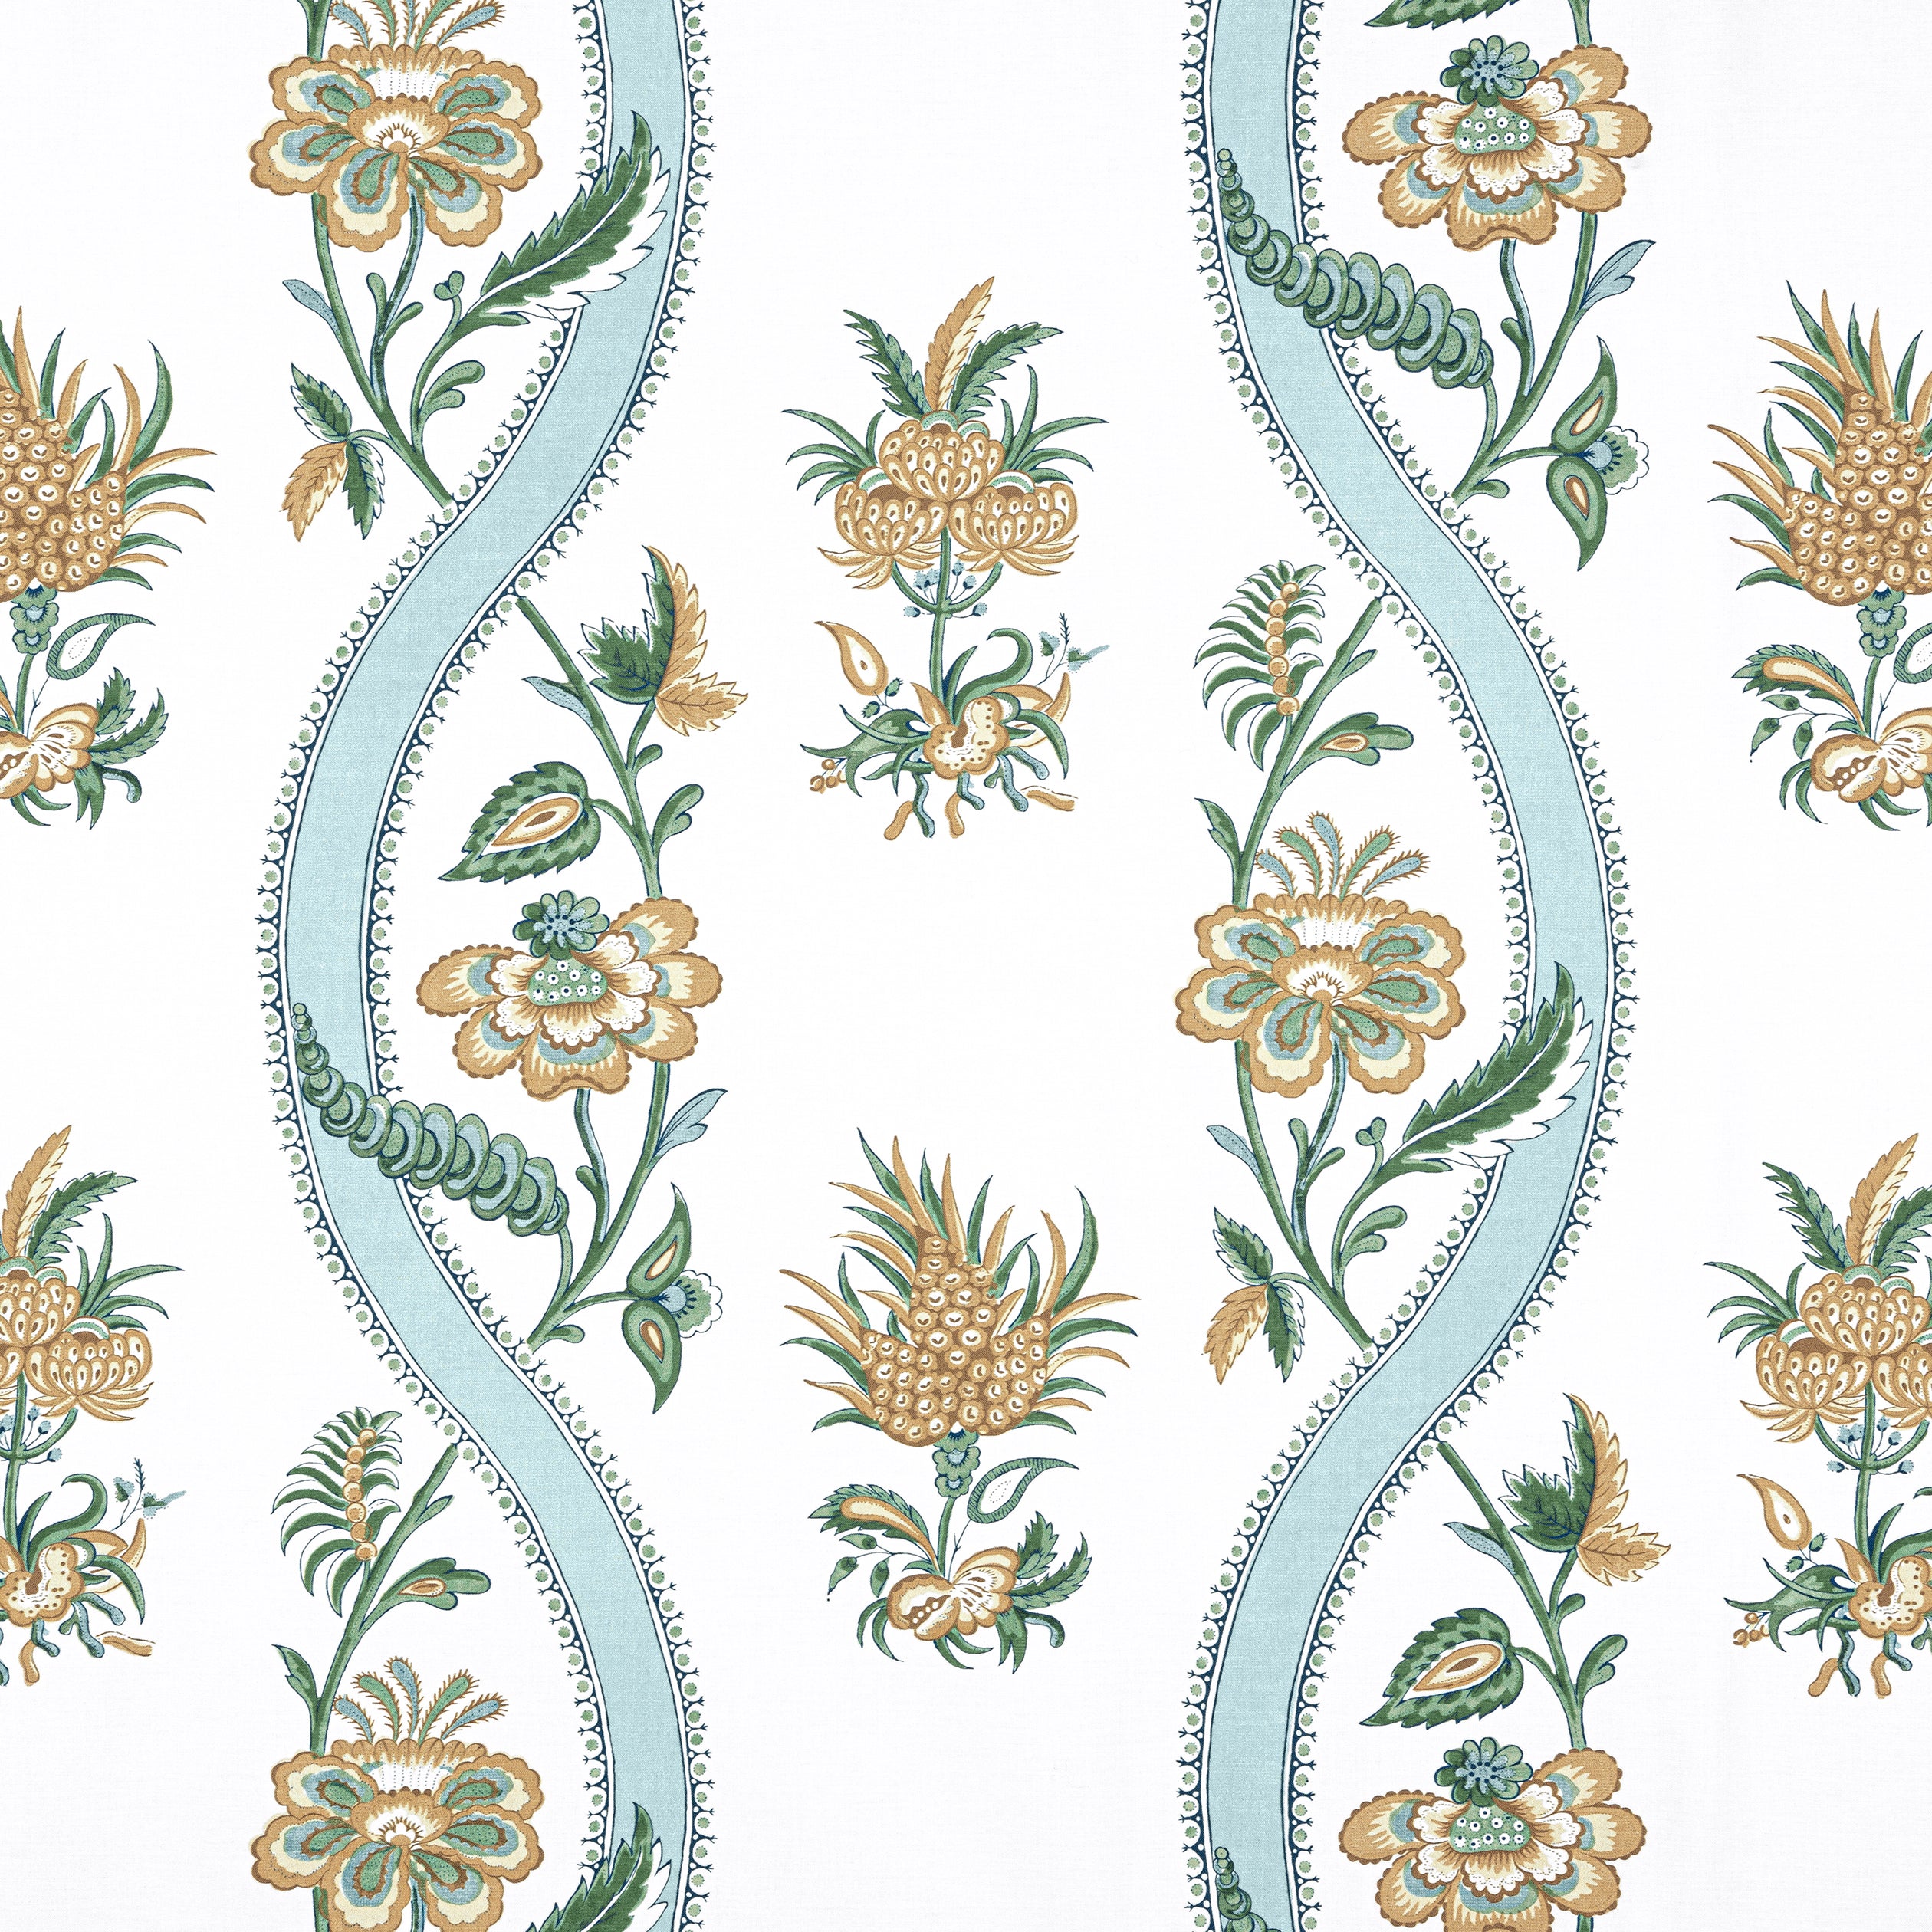 Ribbon Floral fabric in seaglass and gold color - pattern number F936422 - by Thibaut in the Indienne collection